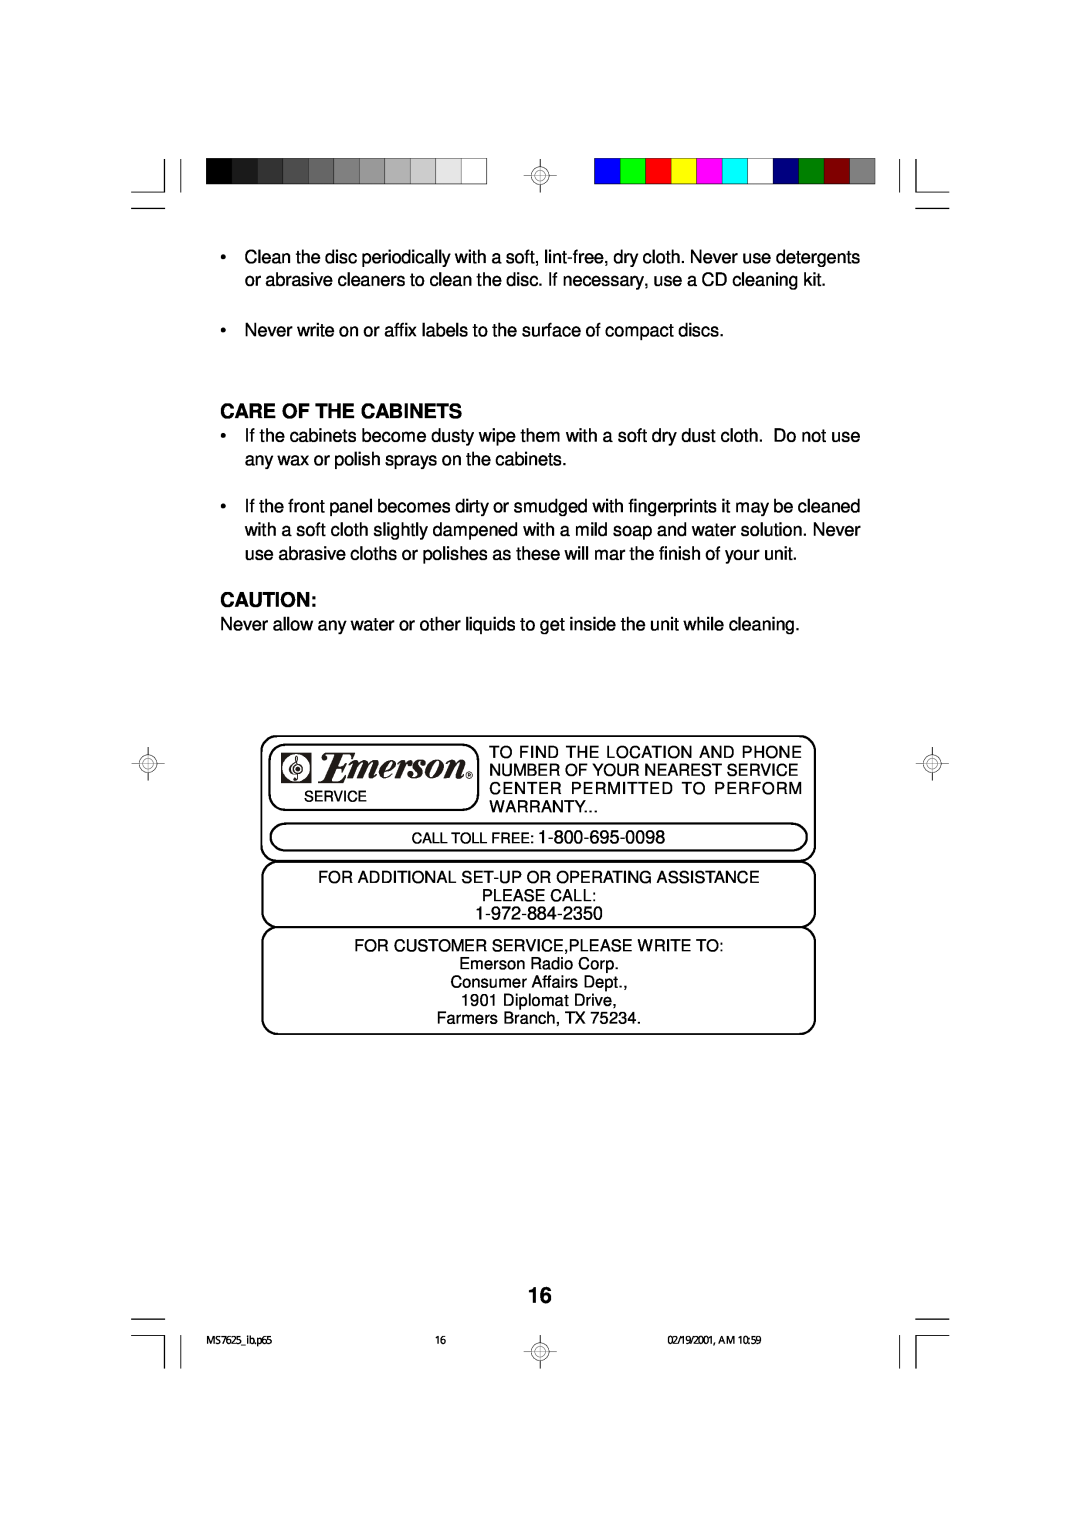 Emerson MS7625 owner manual Care Of The Cabinets 